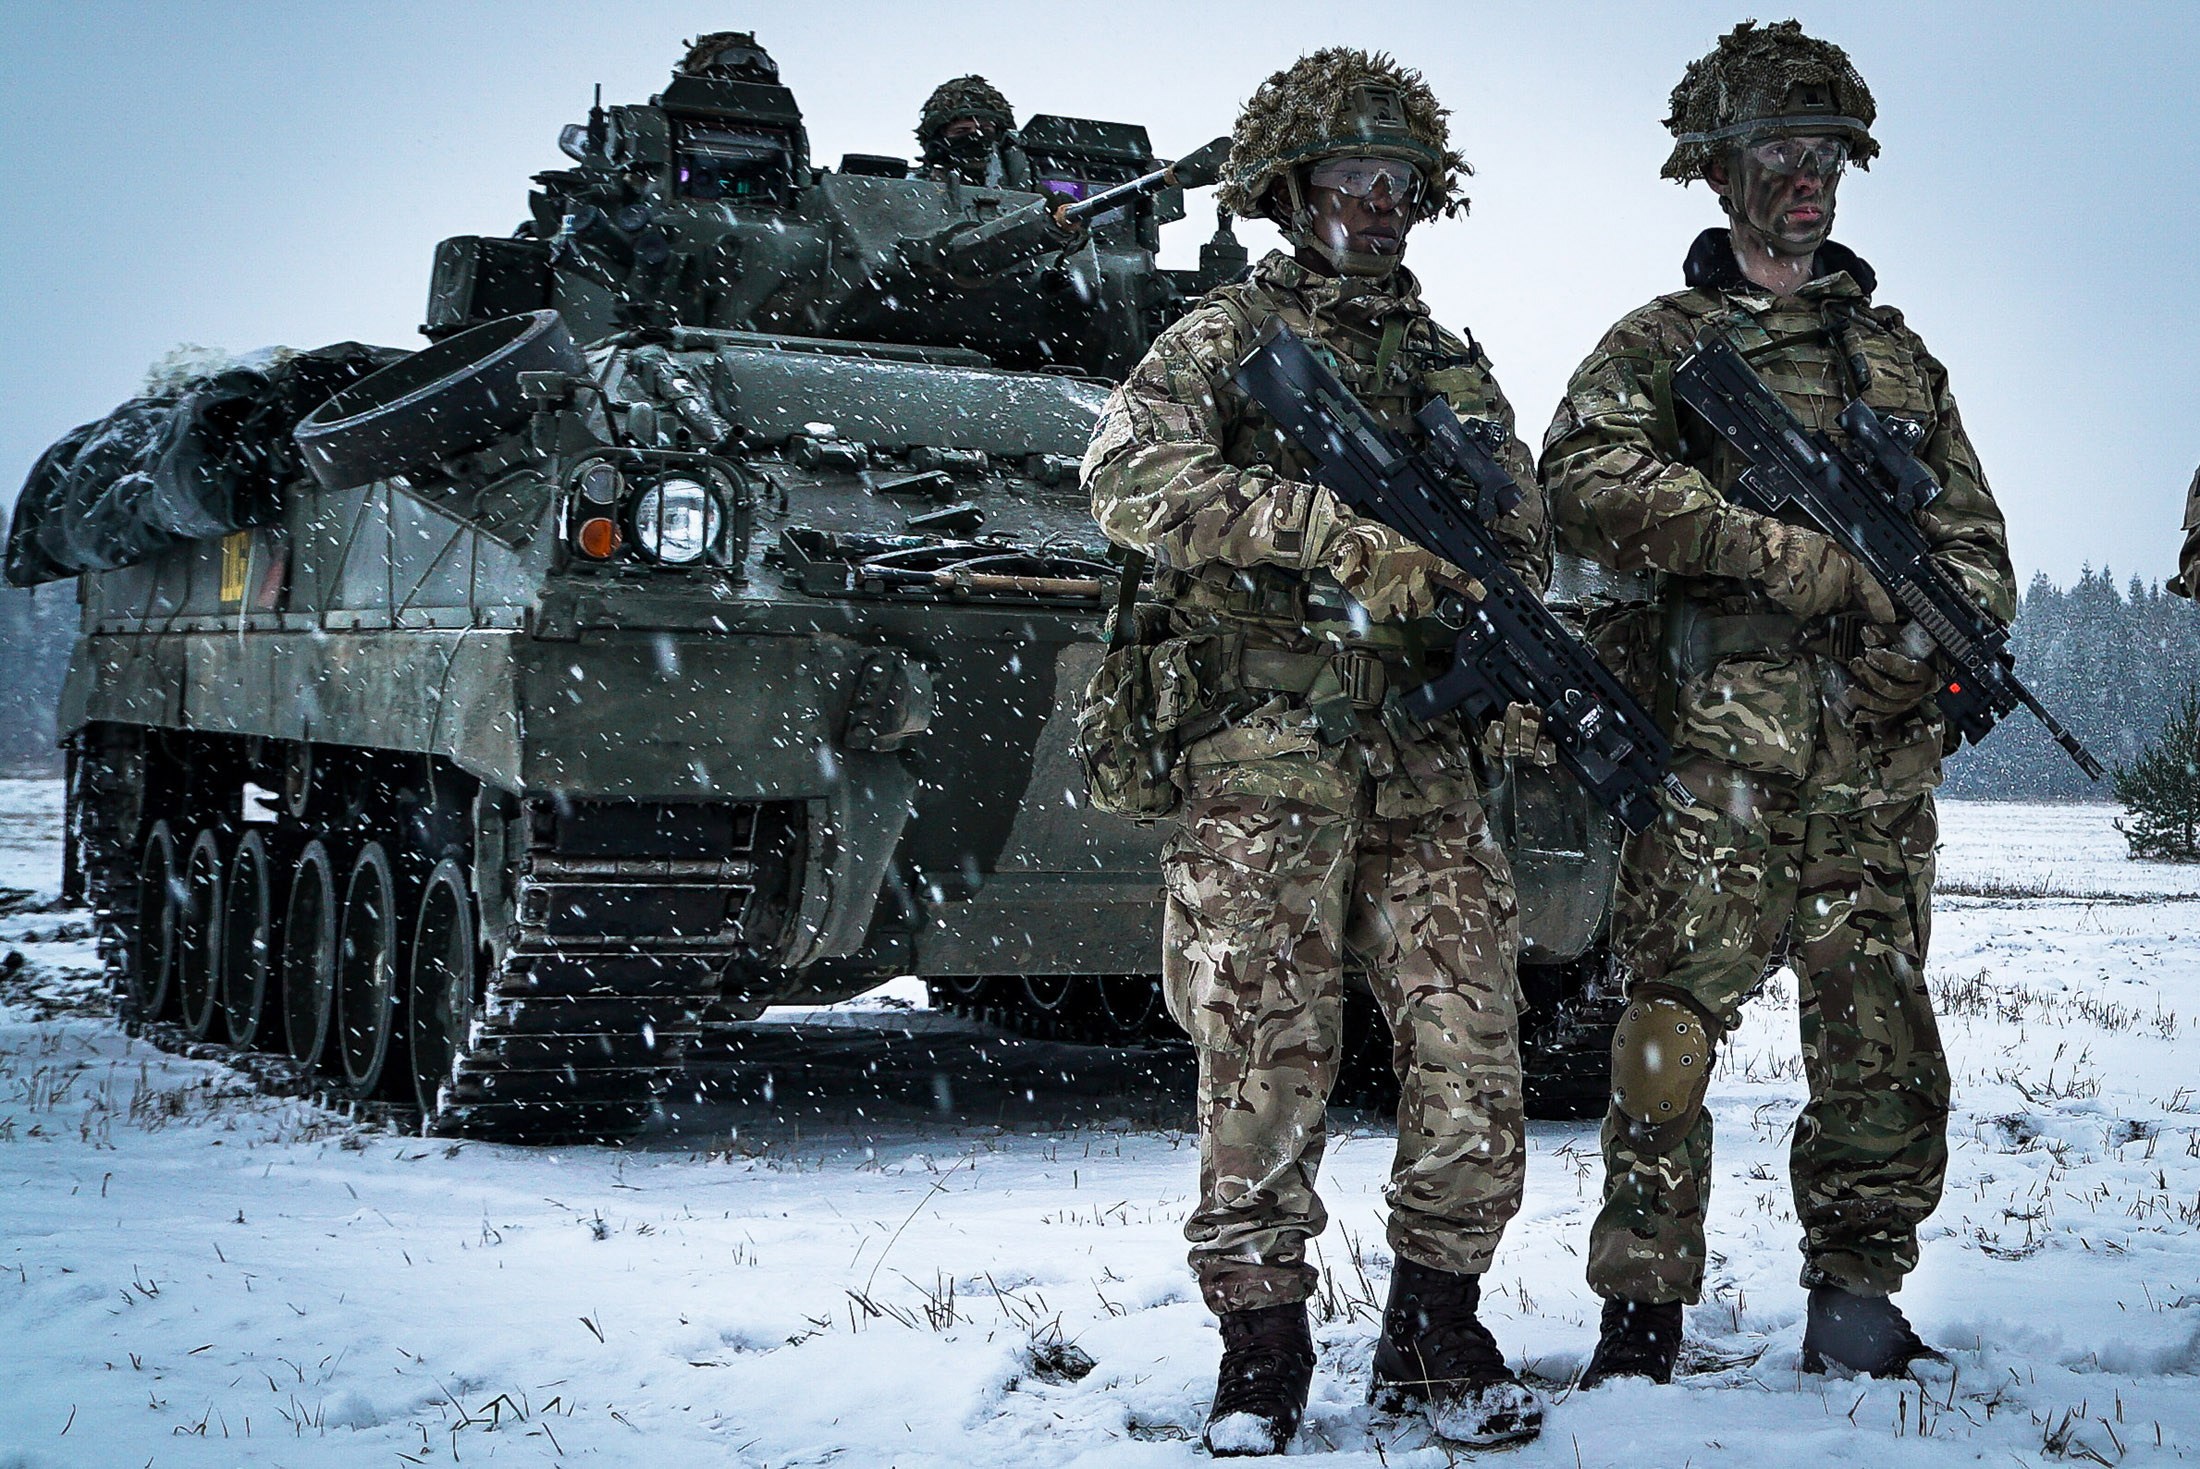 Soldiers from the Royal Welsh Regiment on deployment in Estonia, 2018 (Image courtesy of NATO)